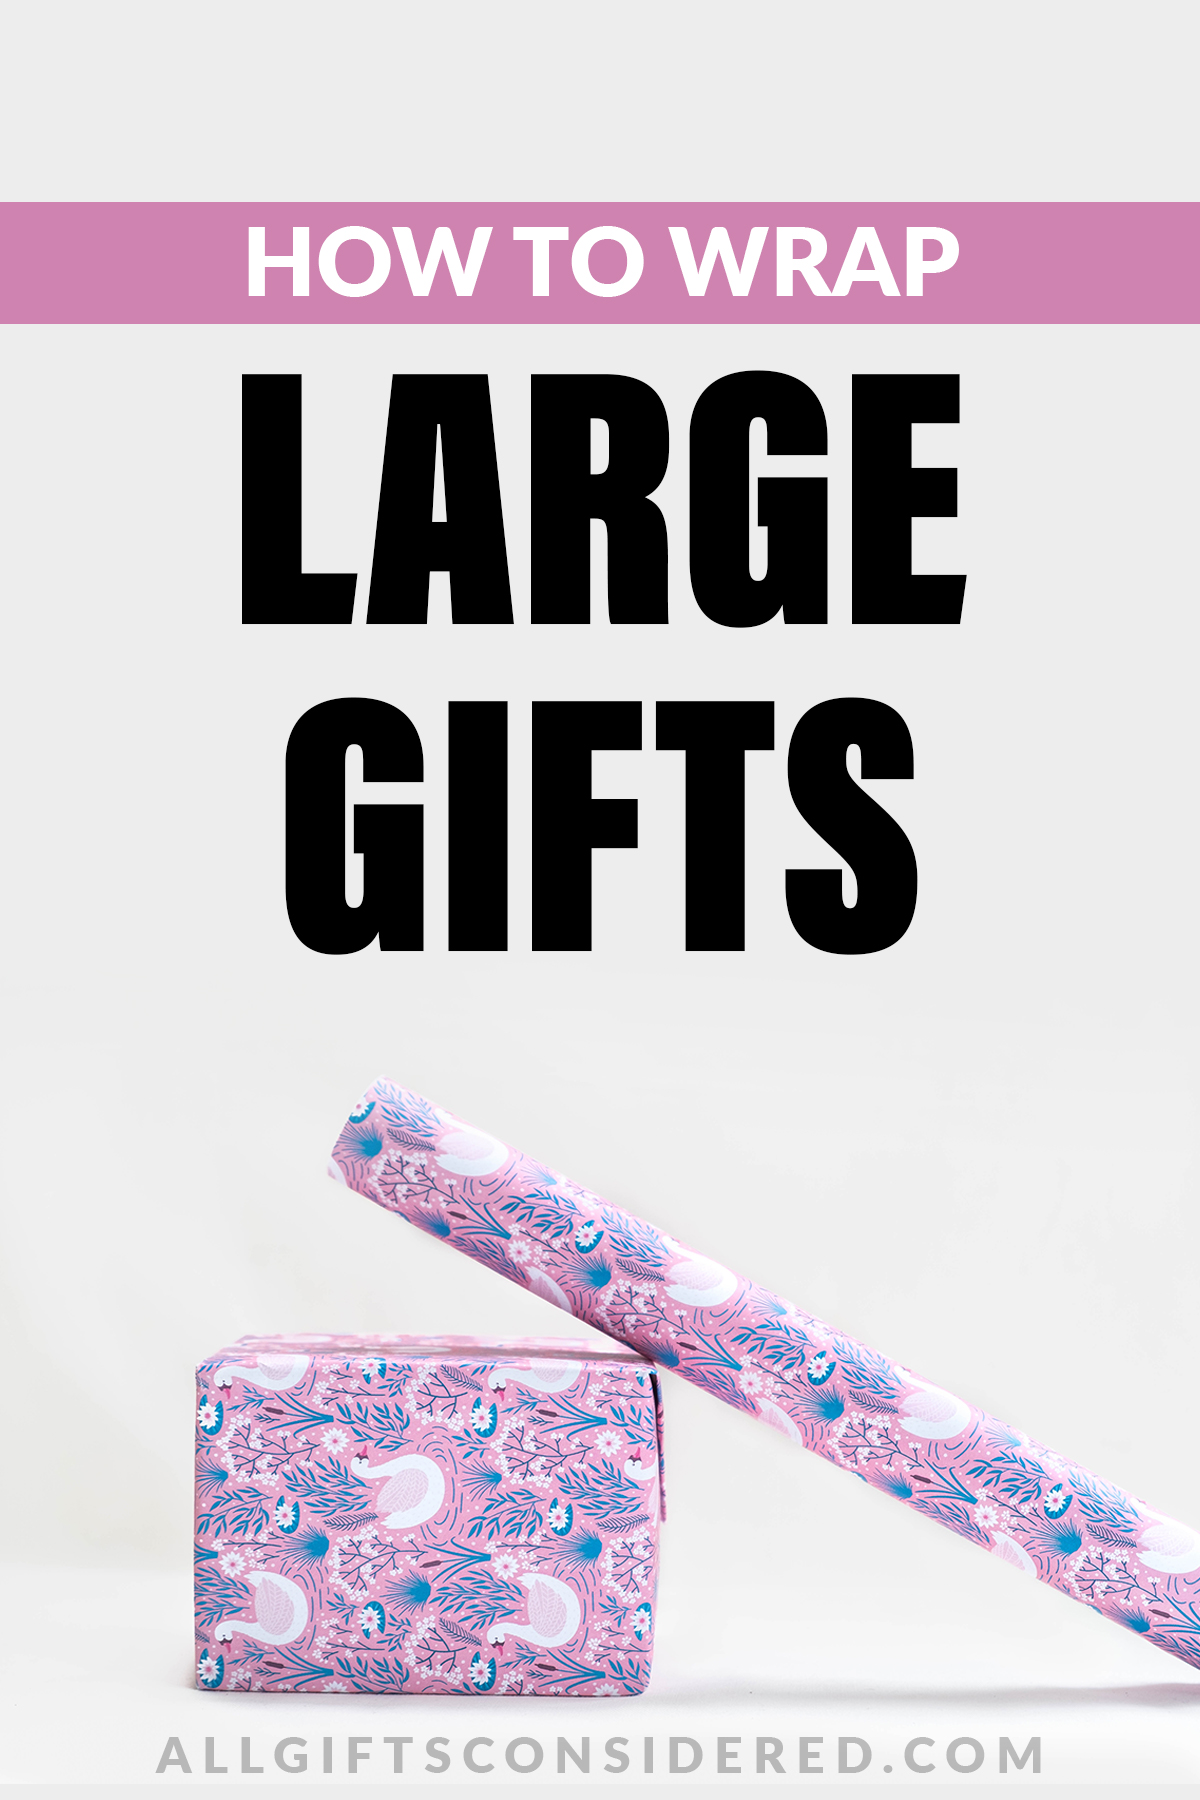 How to wrap crazy big and oversized presents